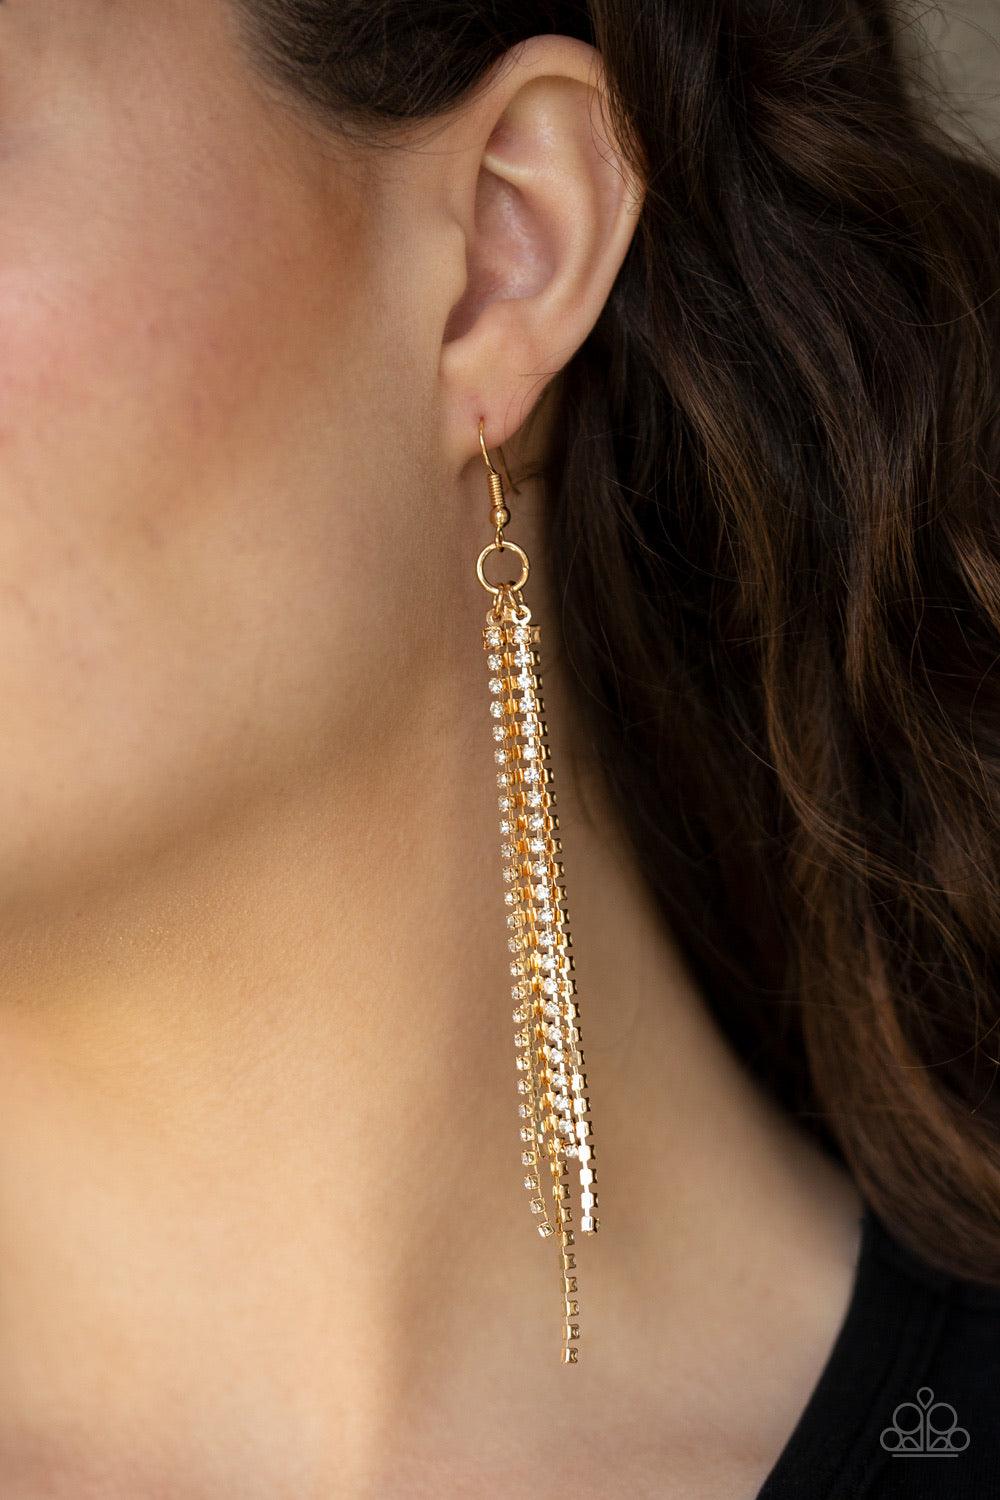 Paparazzi Accessories Center Stage Status - Gold Featuring sleek square fittings, strands of glittery white rhinestones freefall from the ear, creating a glamorous fringe. Earring attaches to a standard fishhook fitting. Jewelry